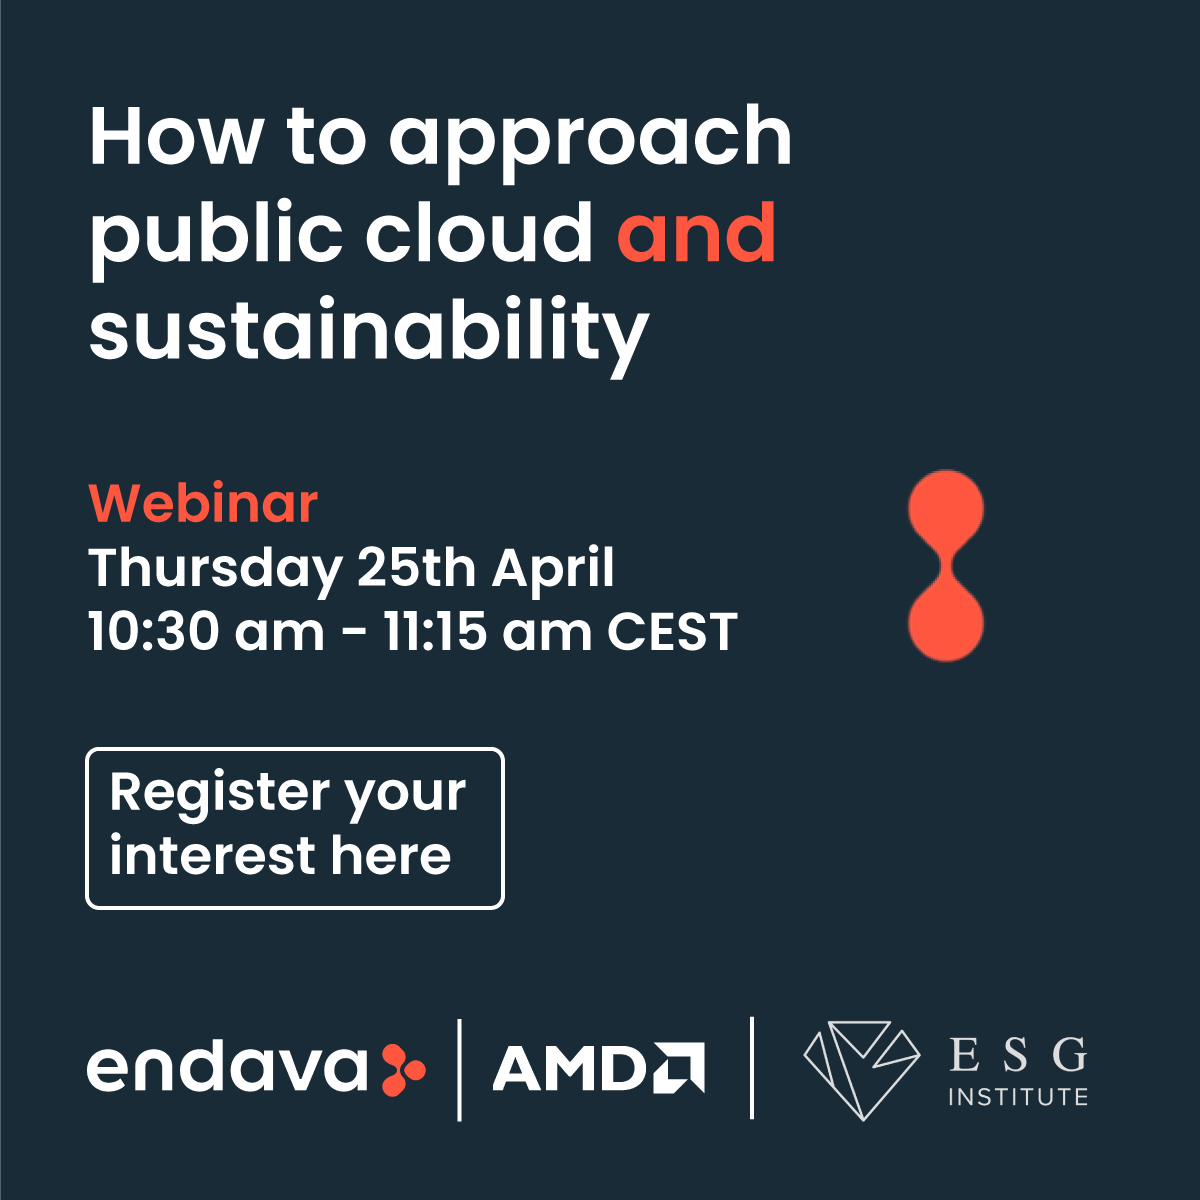 How can you adopt public cloud and achieve your sustainability goals? Join us for a chat with our cloud & sustainability experts to explore: ♻️Where cloud & sustainability intersect ☁️Public cloud strategies 📊Tools that monitor & measure your goals okt.to/Rhd15F